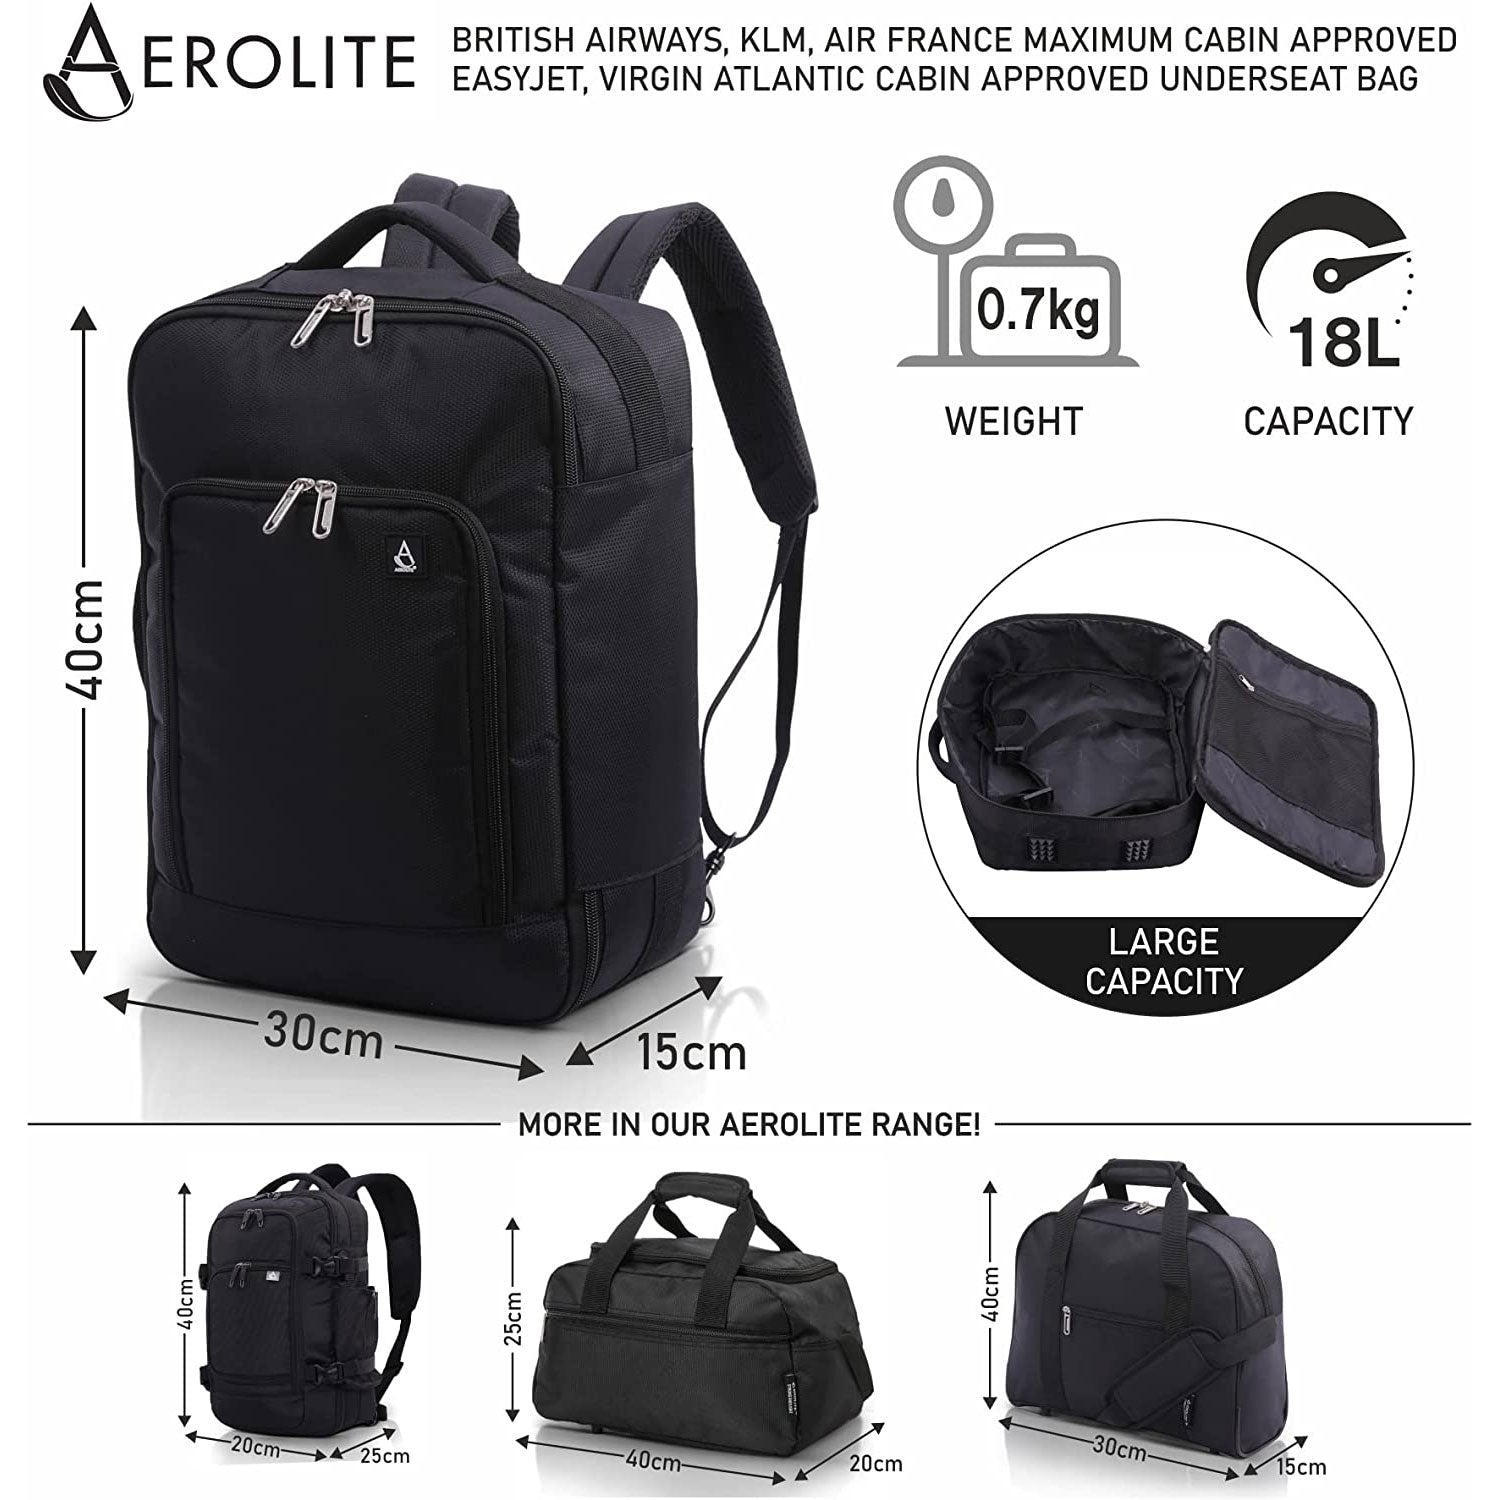 AEROLITE (40x30x15cm) New and Improved 2023 British Airways, KLM & Air France  Maximum Size Cabin Underseat Backpack Rucksack, Also Approved For easyJet, Wizz Air, Virgin Atlantic, Black